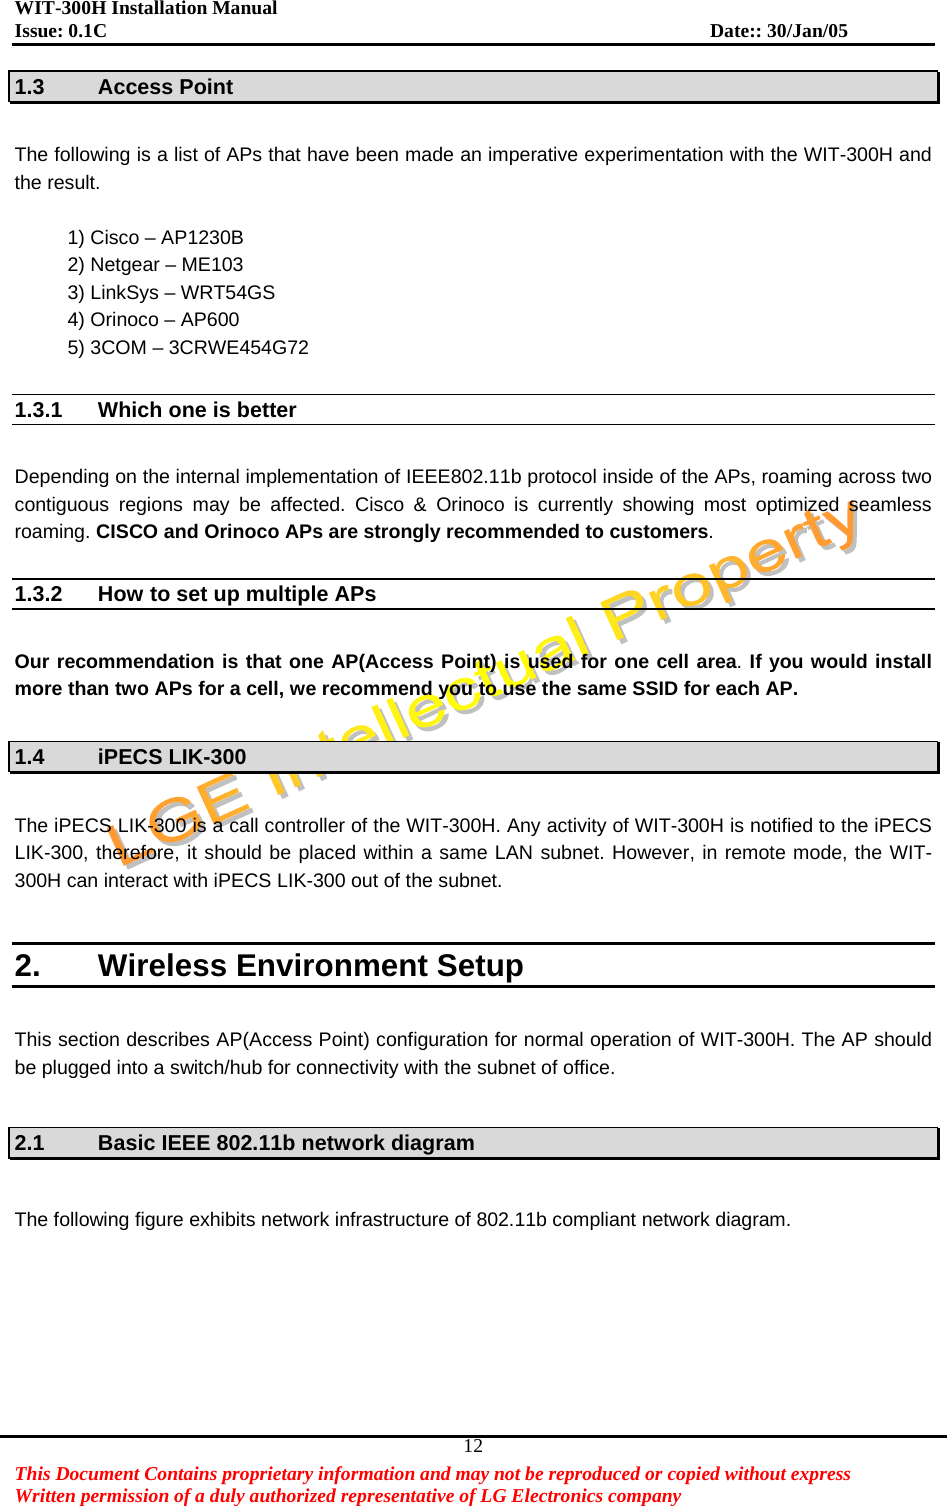 WIT-300H Installation Manual Issue: 0.1C              Date:: 30/Jan/05   This Document Contains proprietary information and may not be reproduced or copied without express   Written permission of a duly authorized representative of LG Electronics company 121.3 Access Point  The following is a list of APs that have been made an imperative experimentation with the WIT-300H and the result.    1) Cisco – AP1230B 2) Netgear – ME103 3) LinkSys – WRT54GS 4) Orinoco – AP600 5) 3COM – 3CRWE454G72  1.3.1  Which one is better    Depending on the internal implementation of IEEE802.11b protocol inside of the APs, roaming across two contiguous regions may be affected. Cisco &amp; Orinoco is currently showing most optimized seamless roaming. CISCO and Orinoco APs are strongly recommended to customers.   1.3.2  How to set up multiple APs    Our recommendation is that one AP(Access Point) is used for one cell area. If you would install more than two APs for a cell, we recommend you to use the same SSID for each AP.  1.4 iPECS LIK-300  The iPECS LIK-300 is a call controller of the WIT-300H. Any activity of WIT-300H is notified to the iPECS LIK-300, therefore, it should be placed within a same LAN subnet. However, in remote mode, the WIT-300H can interact with iPECS LIK-300 out of the subnet.    2.  Wireless Environment Setup  This section describes AP(Access Point) configuration for normal operation of WIT-300H. The AP should be plugged into a switch/hub for connectivity with the subnet of office.    2.1  Basic IEEE 802.11b network diagram  The following figure exhibits network infrastructure of 802.11b compliant network diagram.    